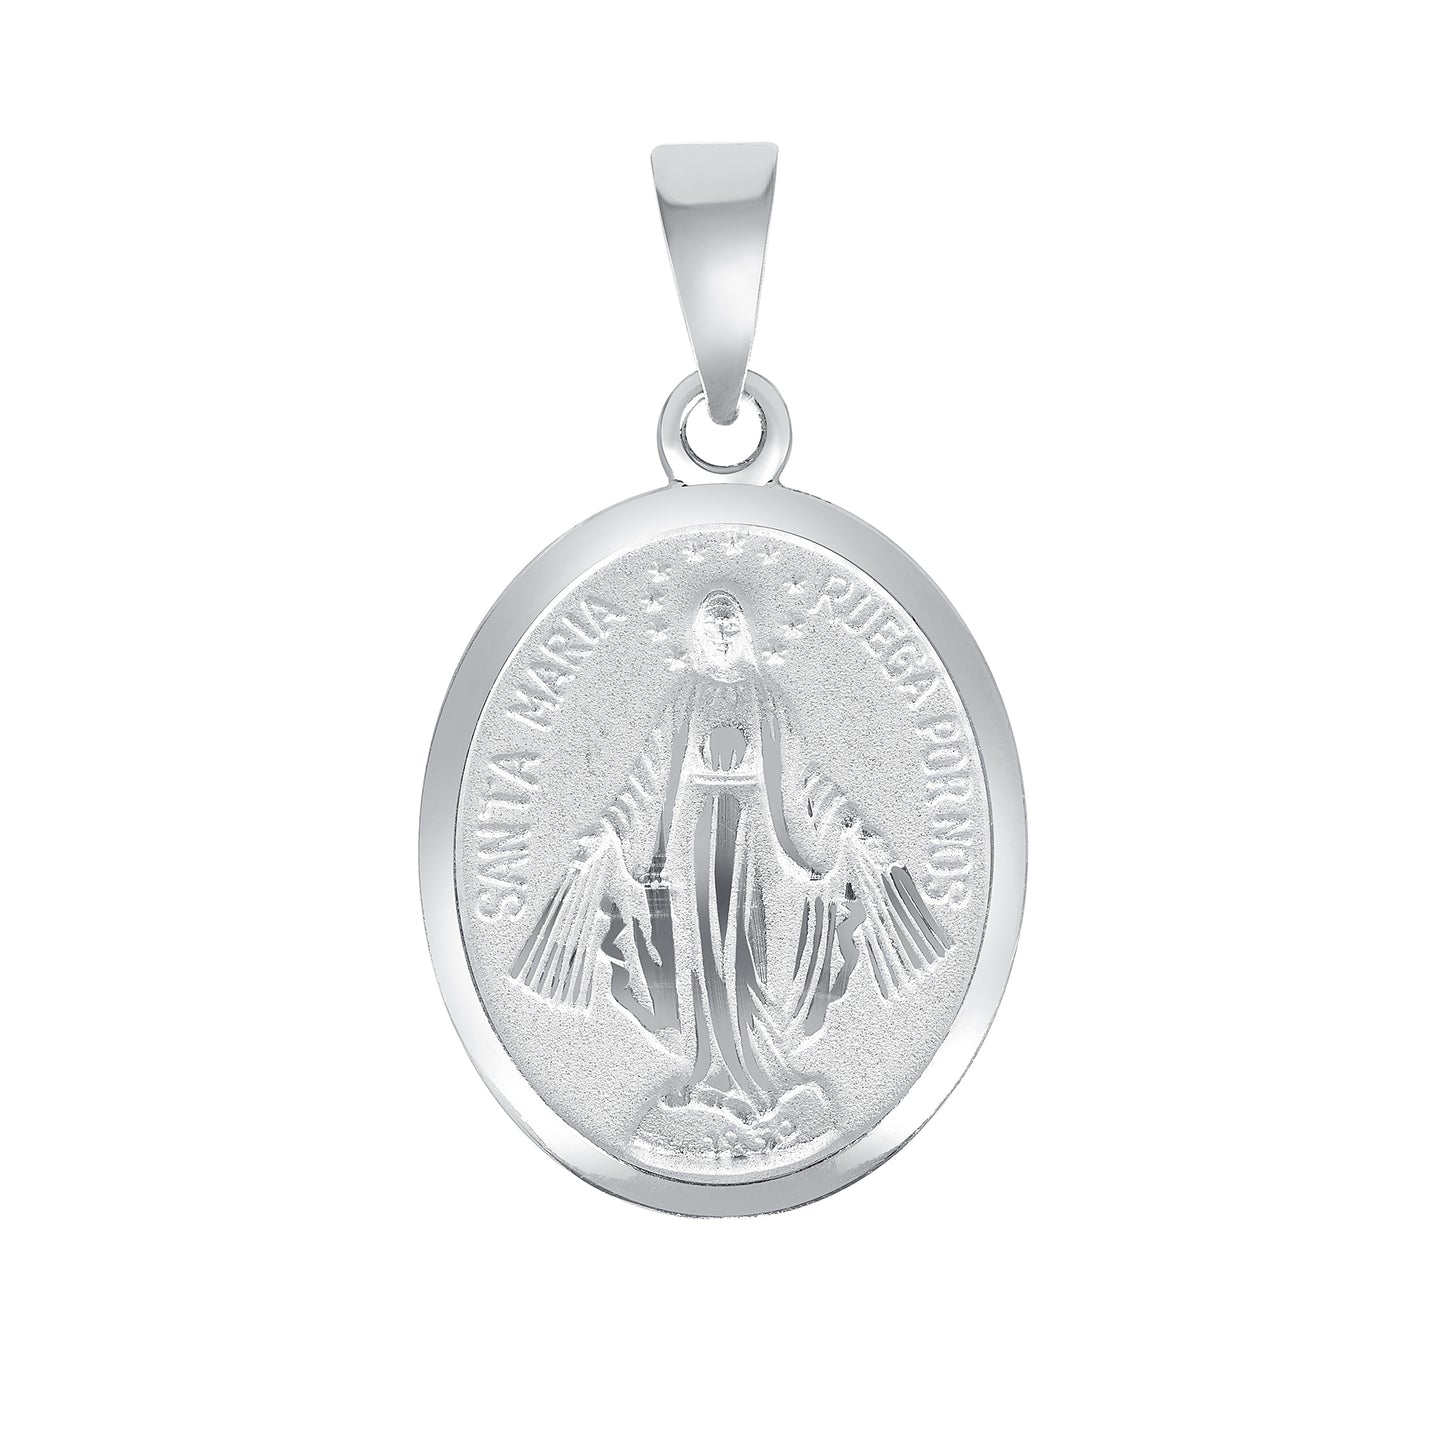 Silver 925 Virgin Mary Miraculous Medium Two-Sided Oval Pendant. MEDA66-M